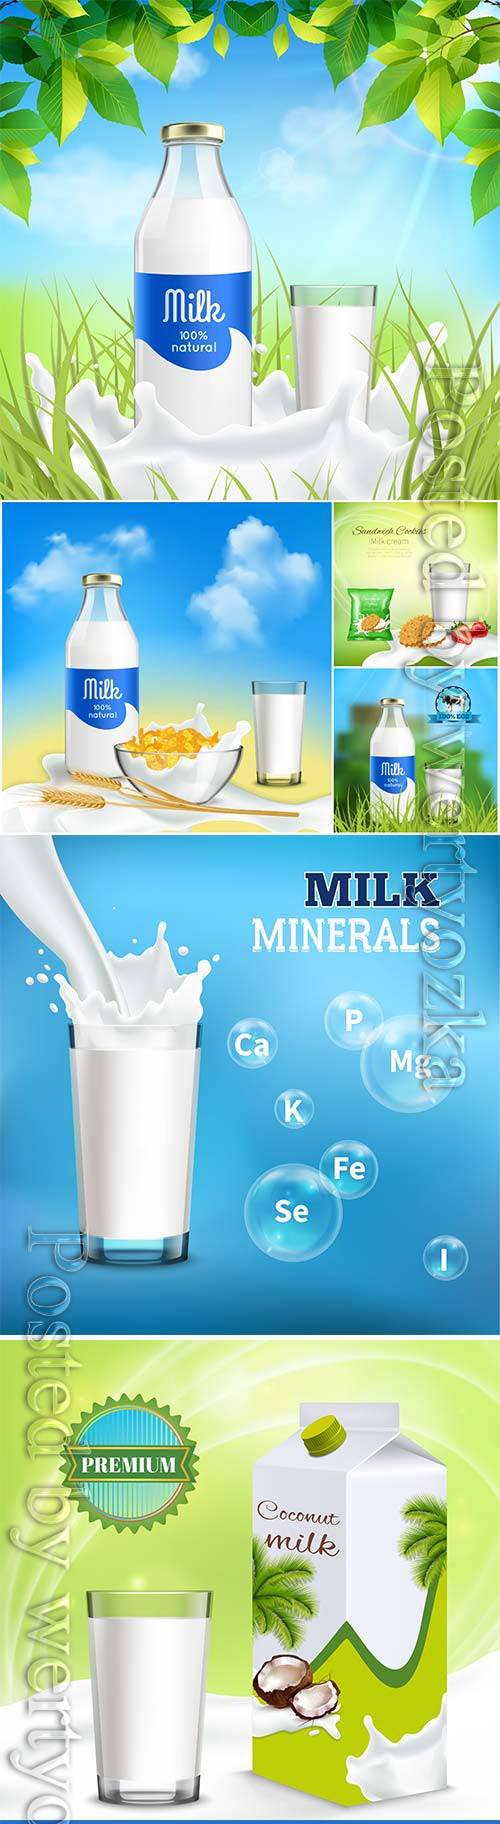 Milk ,bottle, glass, isometric, element, vector, collection